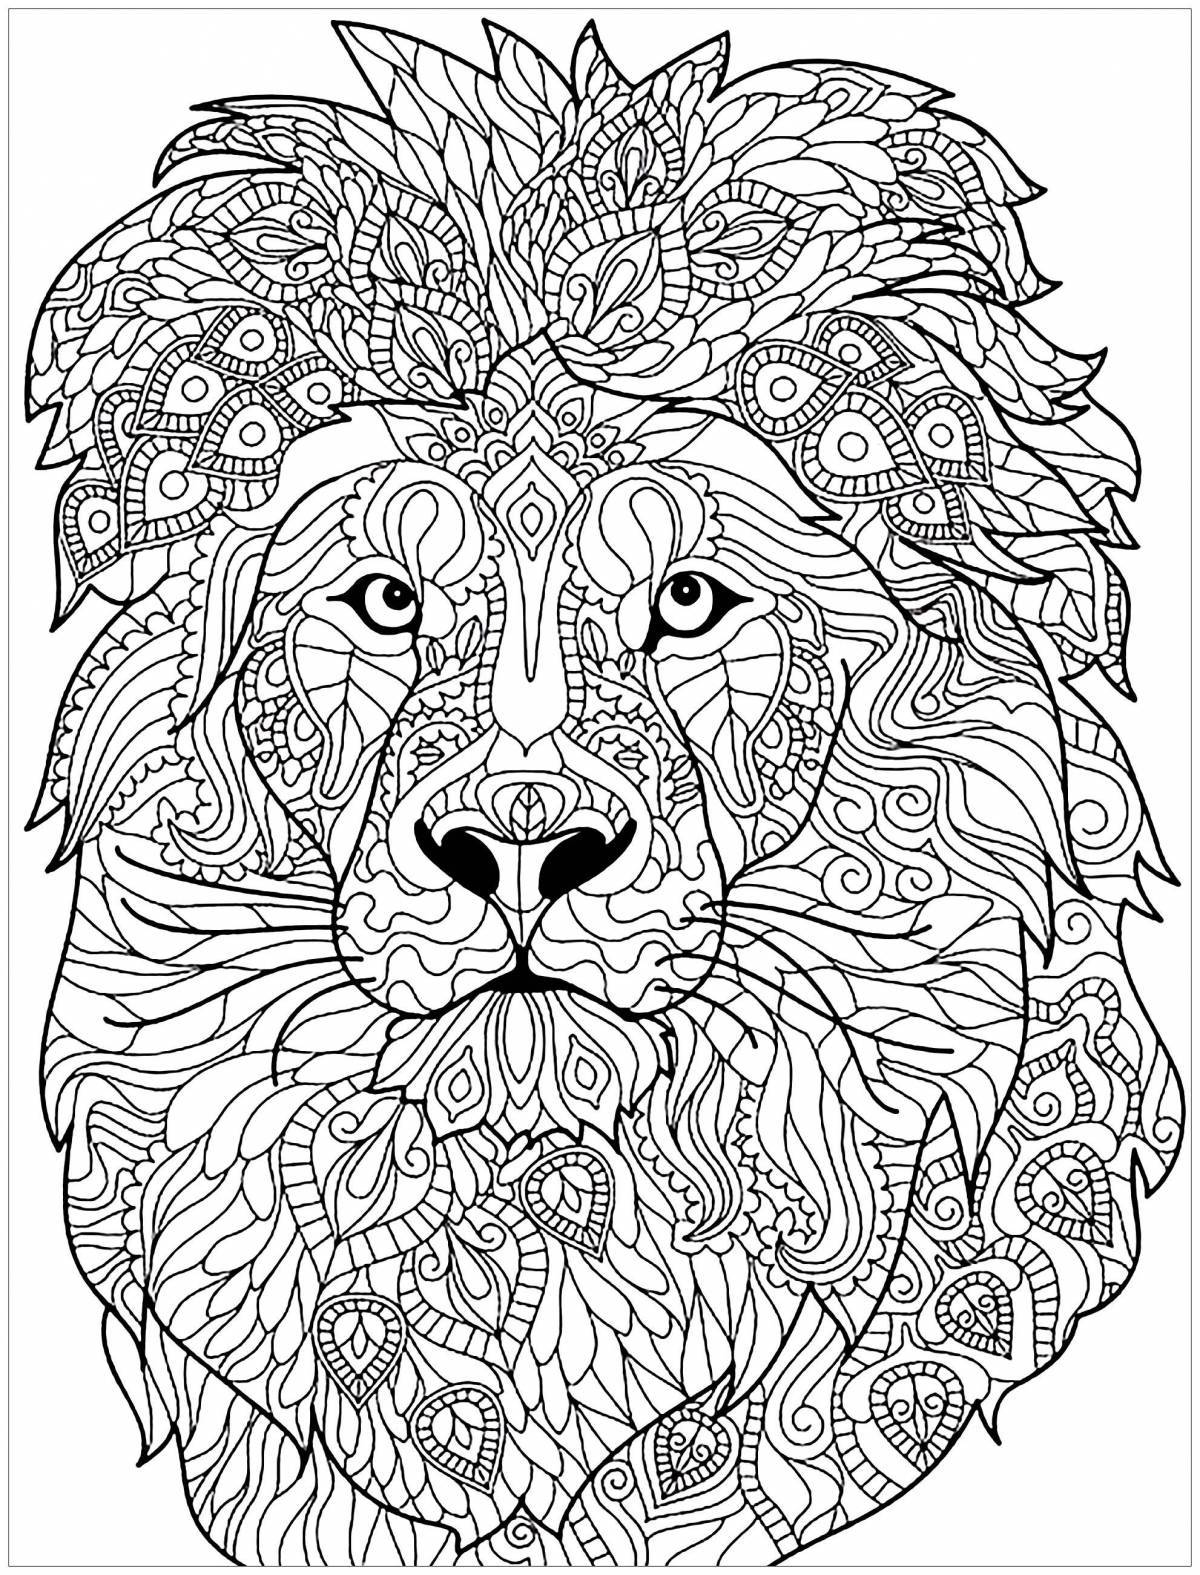 Awesome complex animal coloring pages